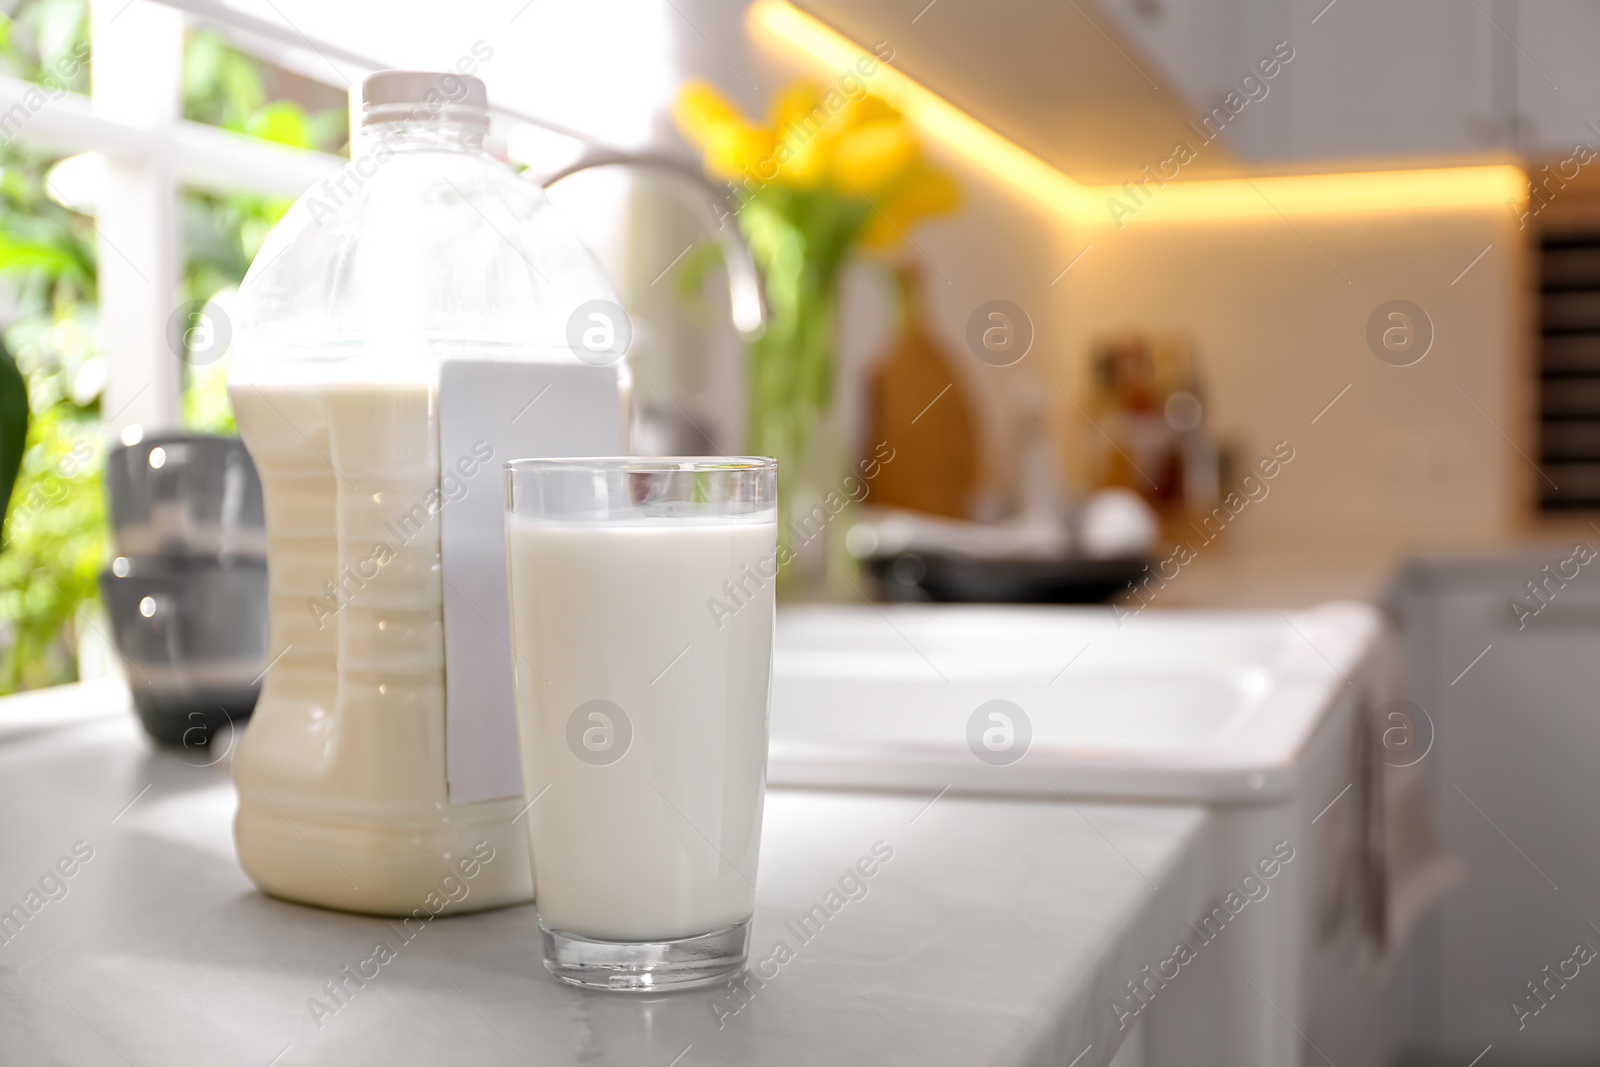 Photo of Gallon bottle of milk and glass on white countertop in kitchen. Space for text